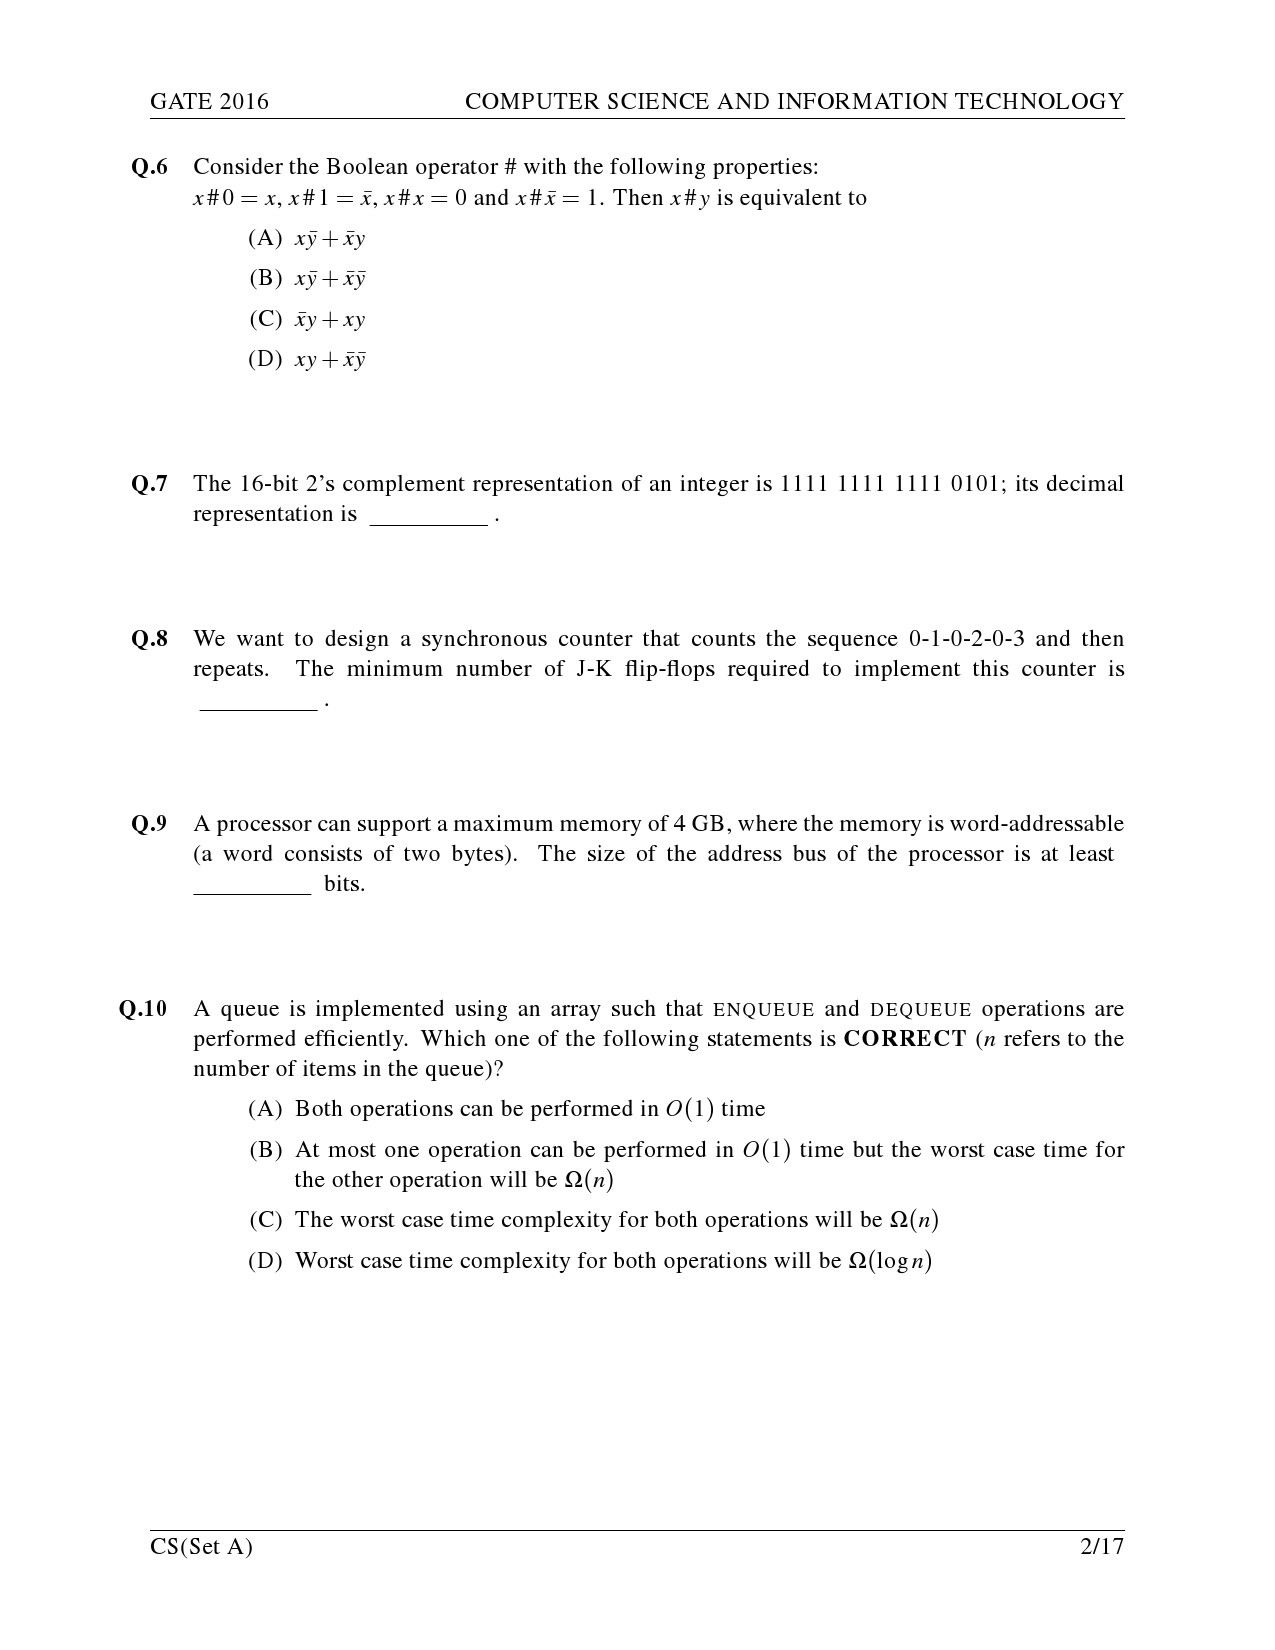 GATE Exam Question Paper 2016 Computer Science and Information Technology Set A 5